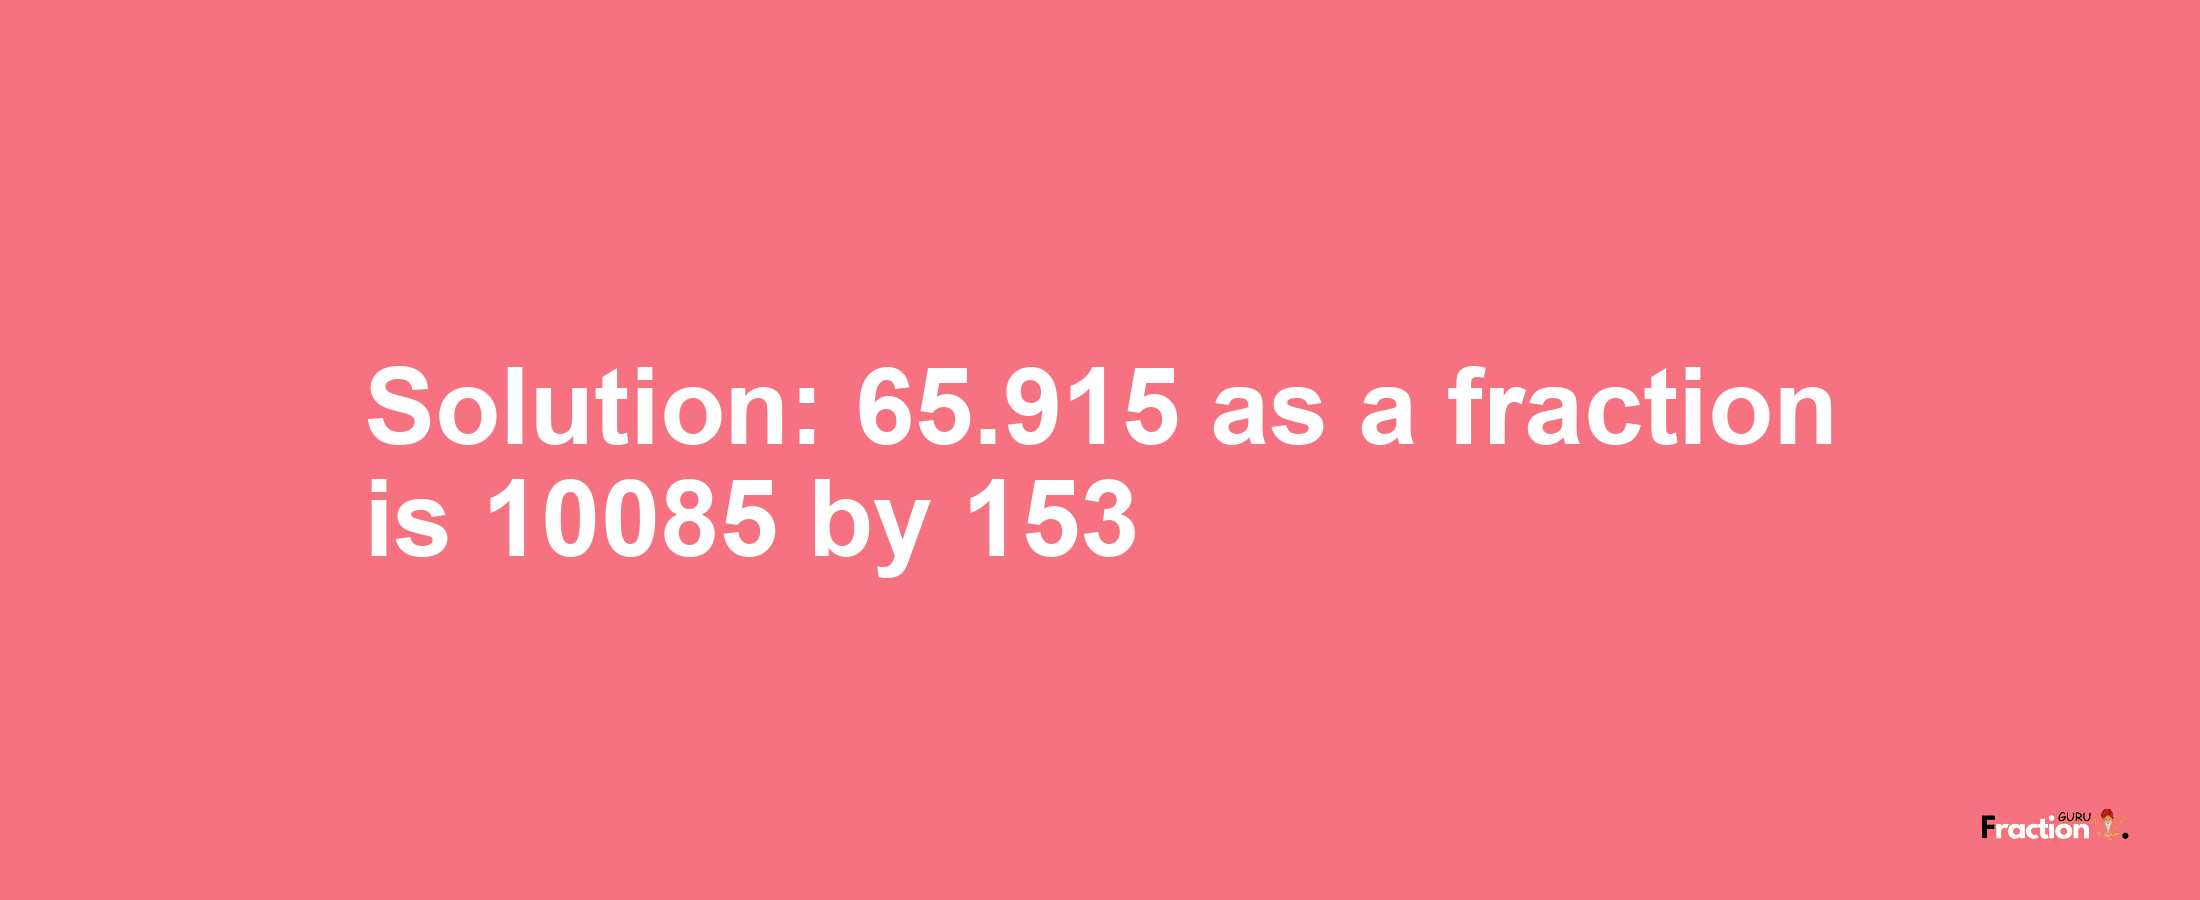 Solution:65.915 as a fraction is 10085/153